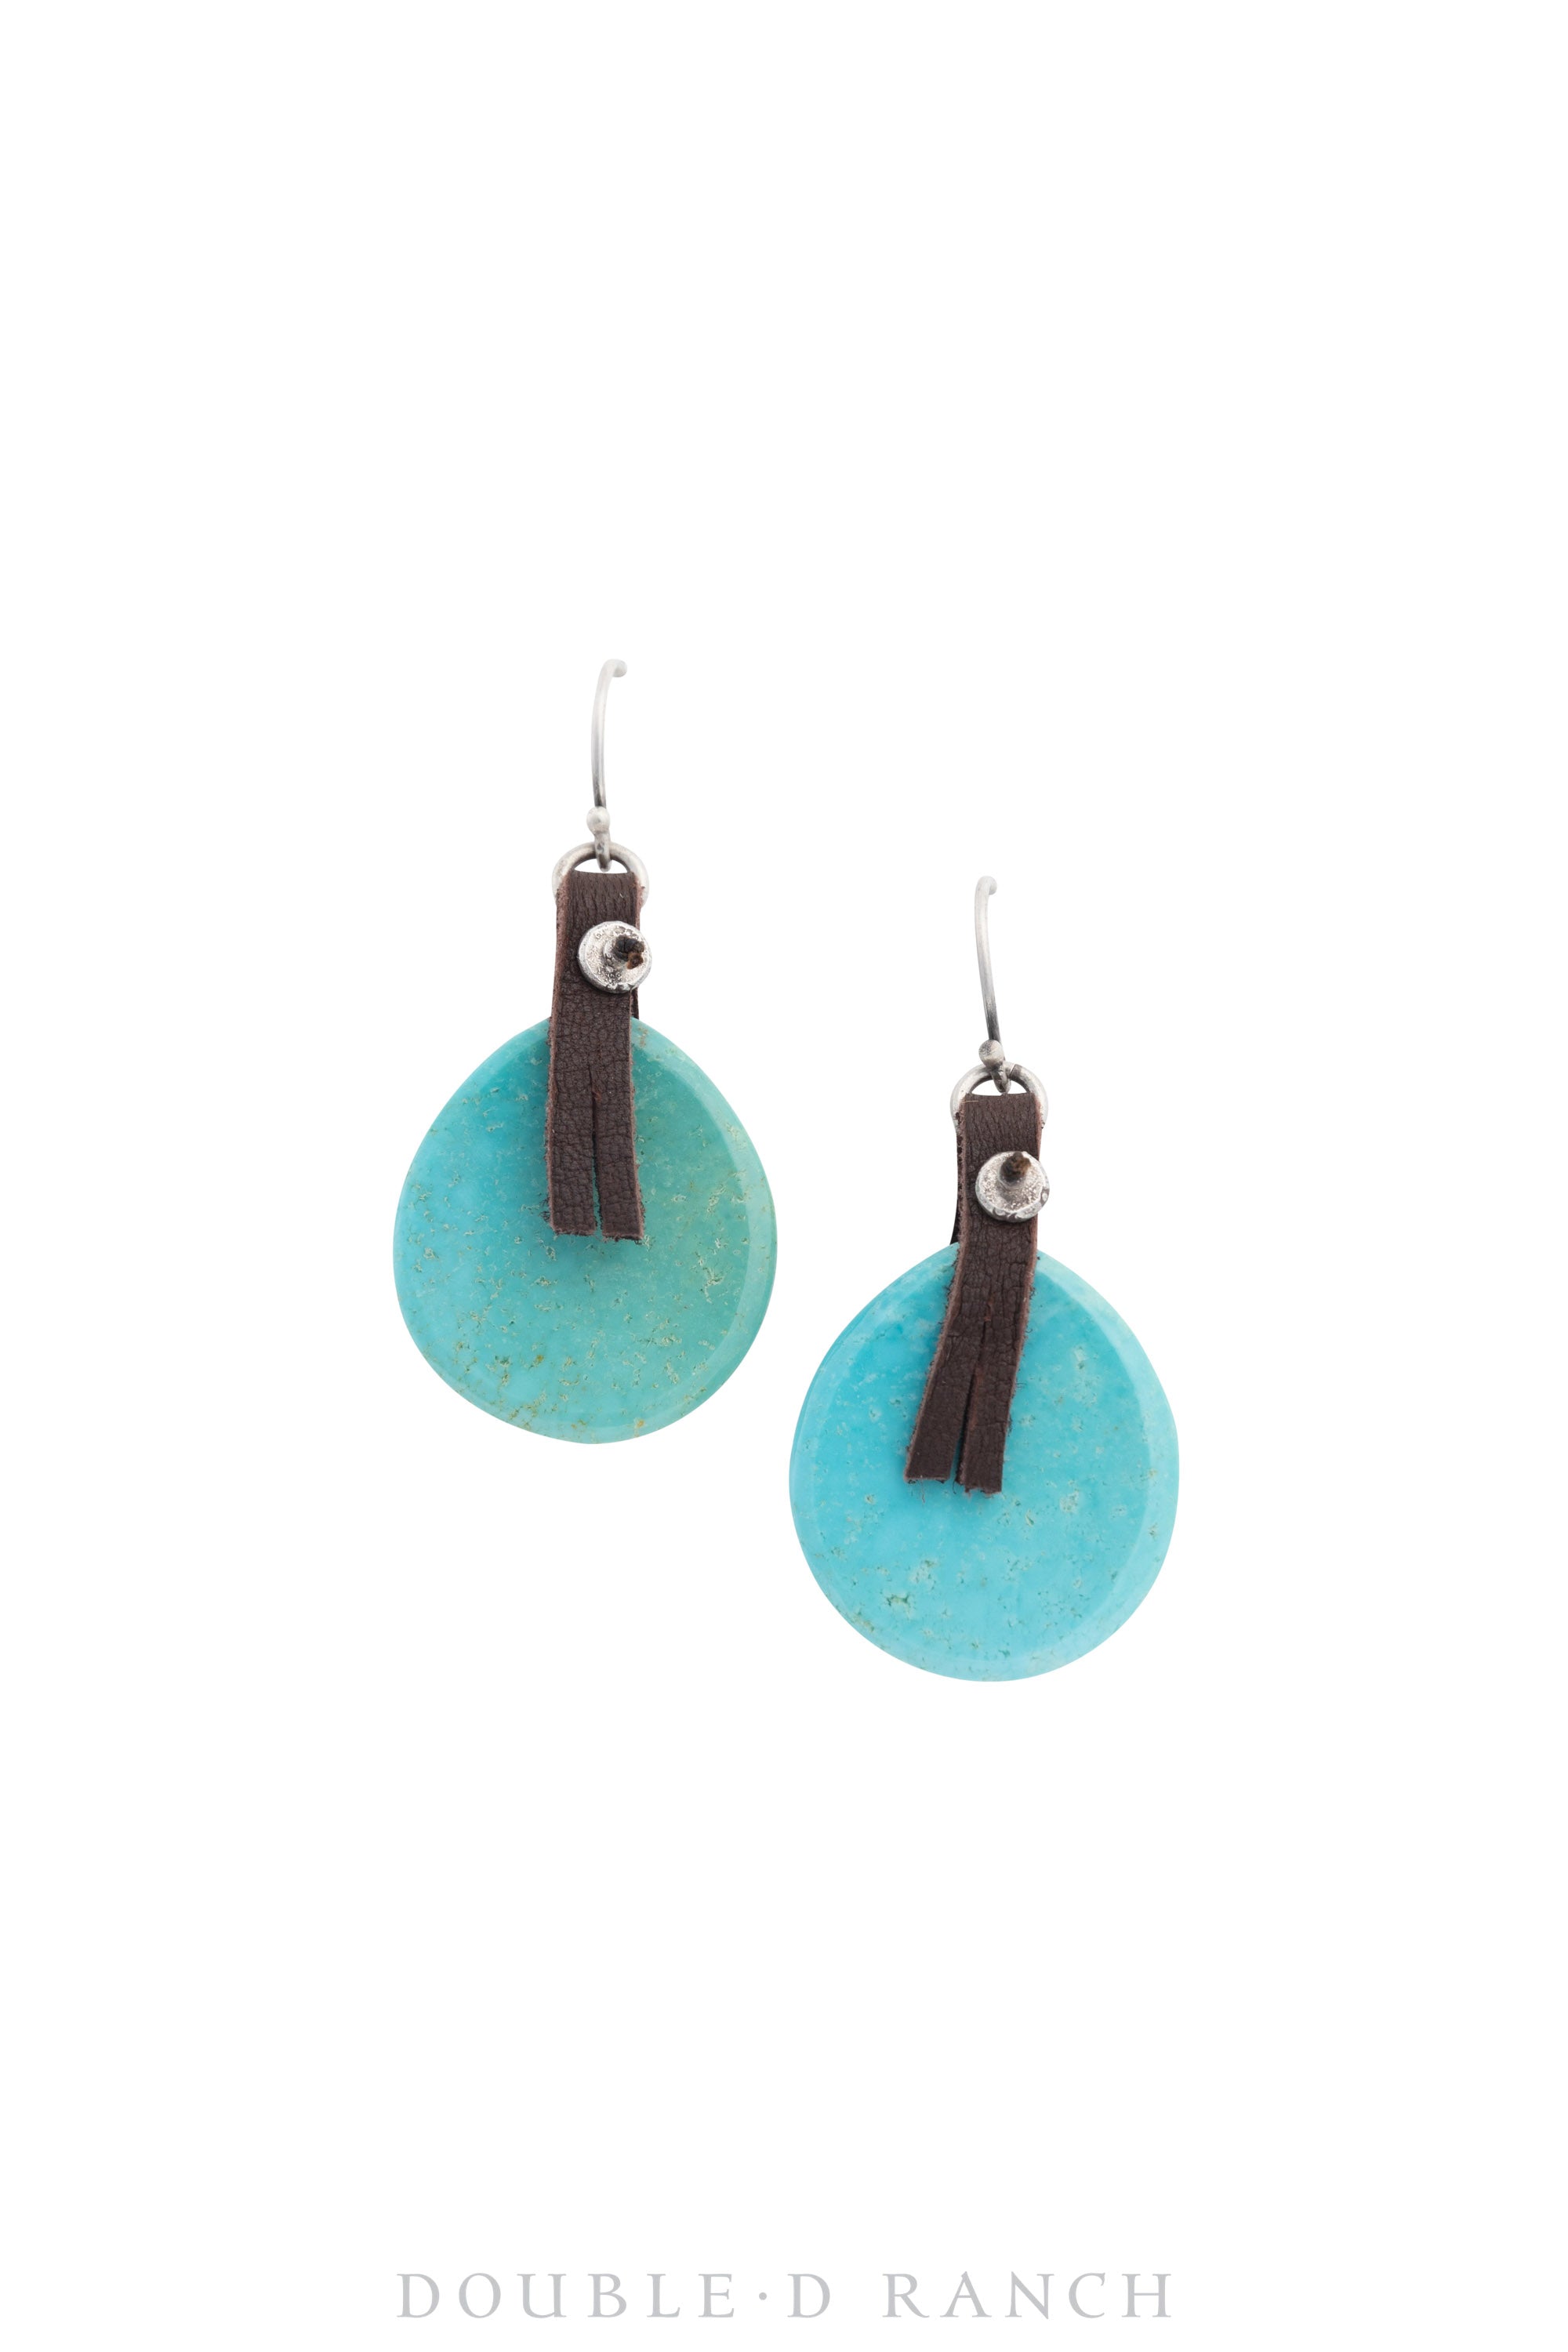 Earrings, Slab, Turquoise, Contemporary, 1483